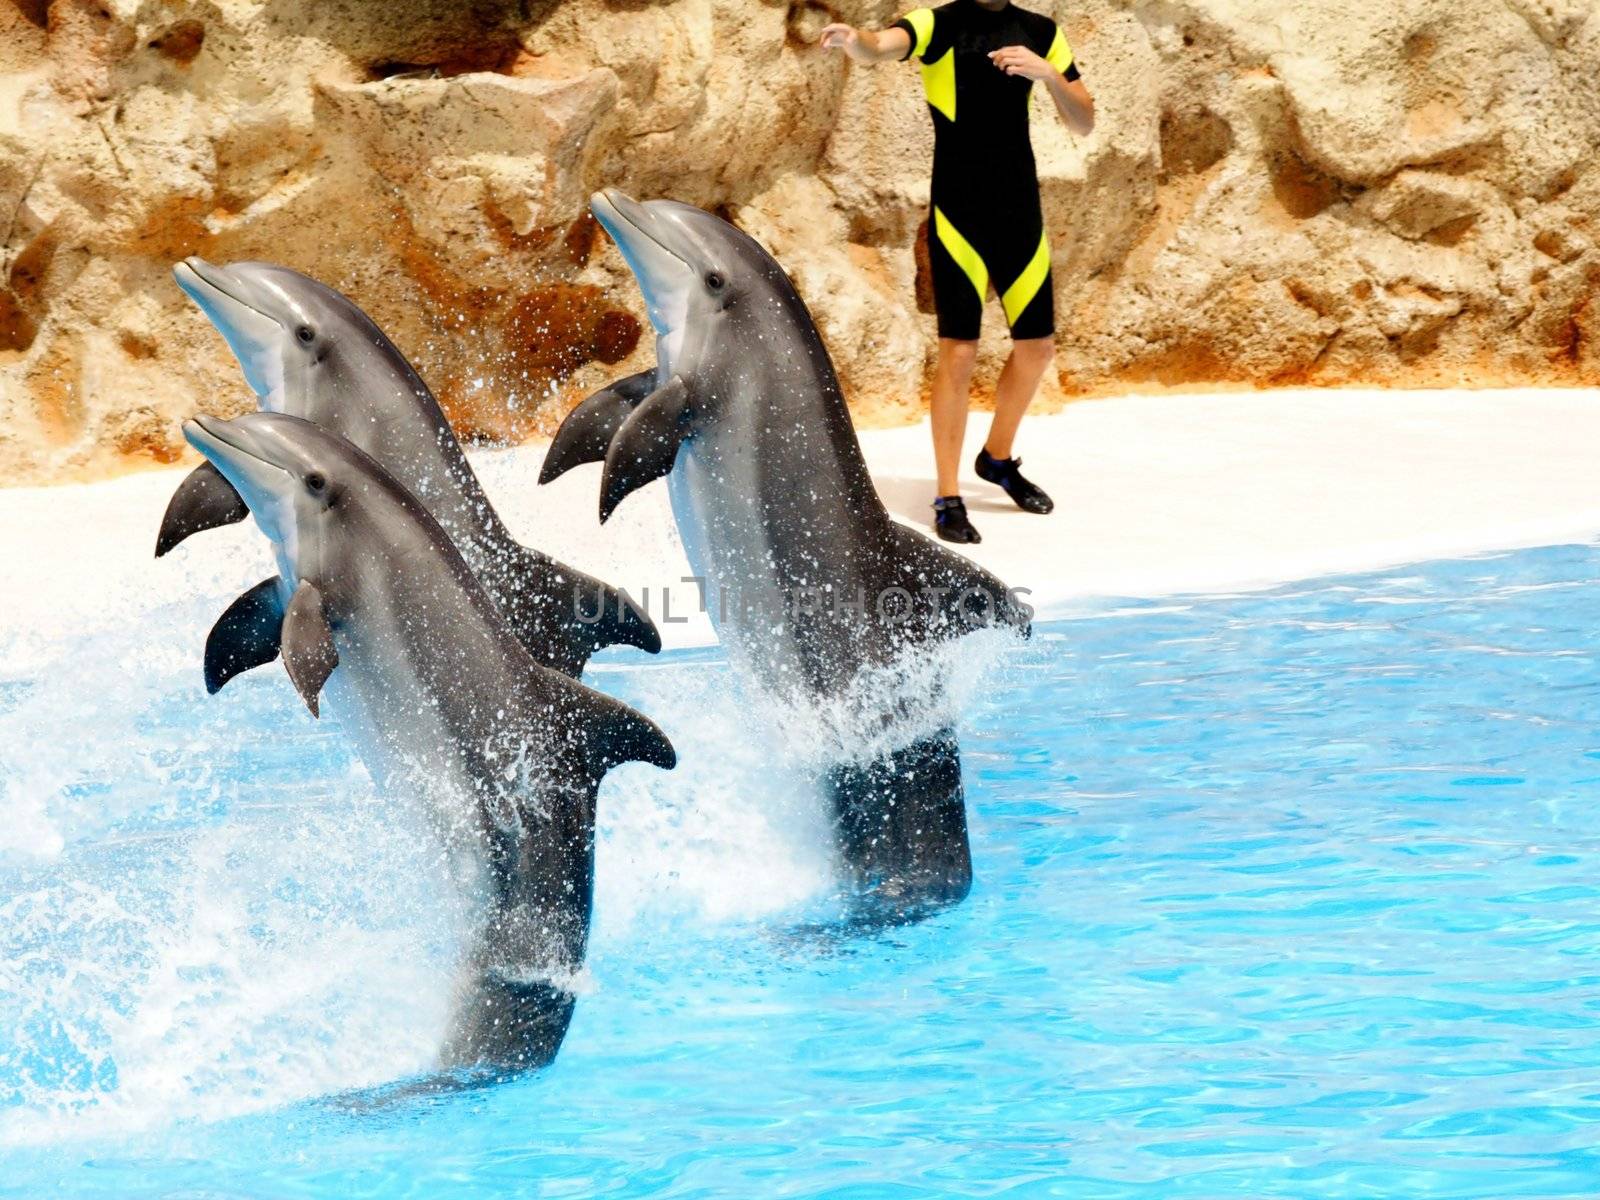 Bottlenose Dolphins preforming in a show